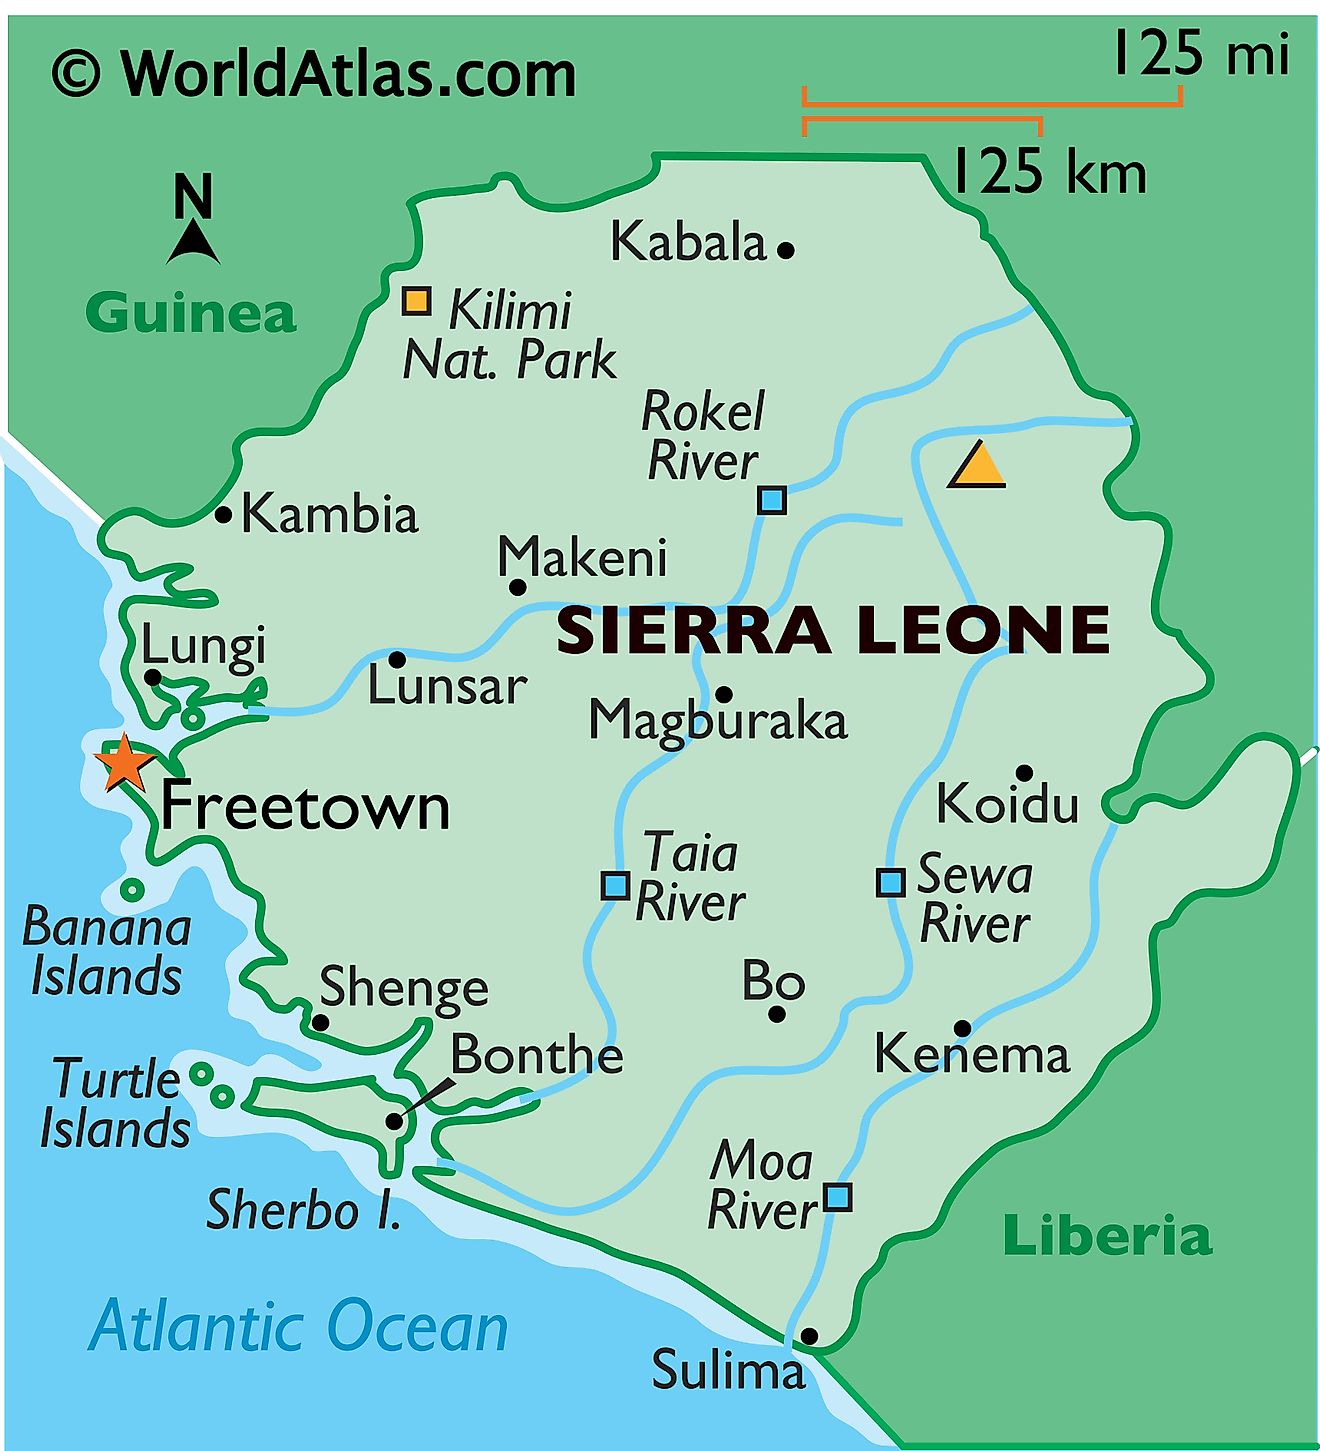 Sierra Leone maps and facts